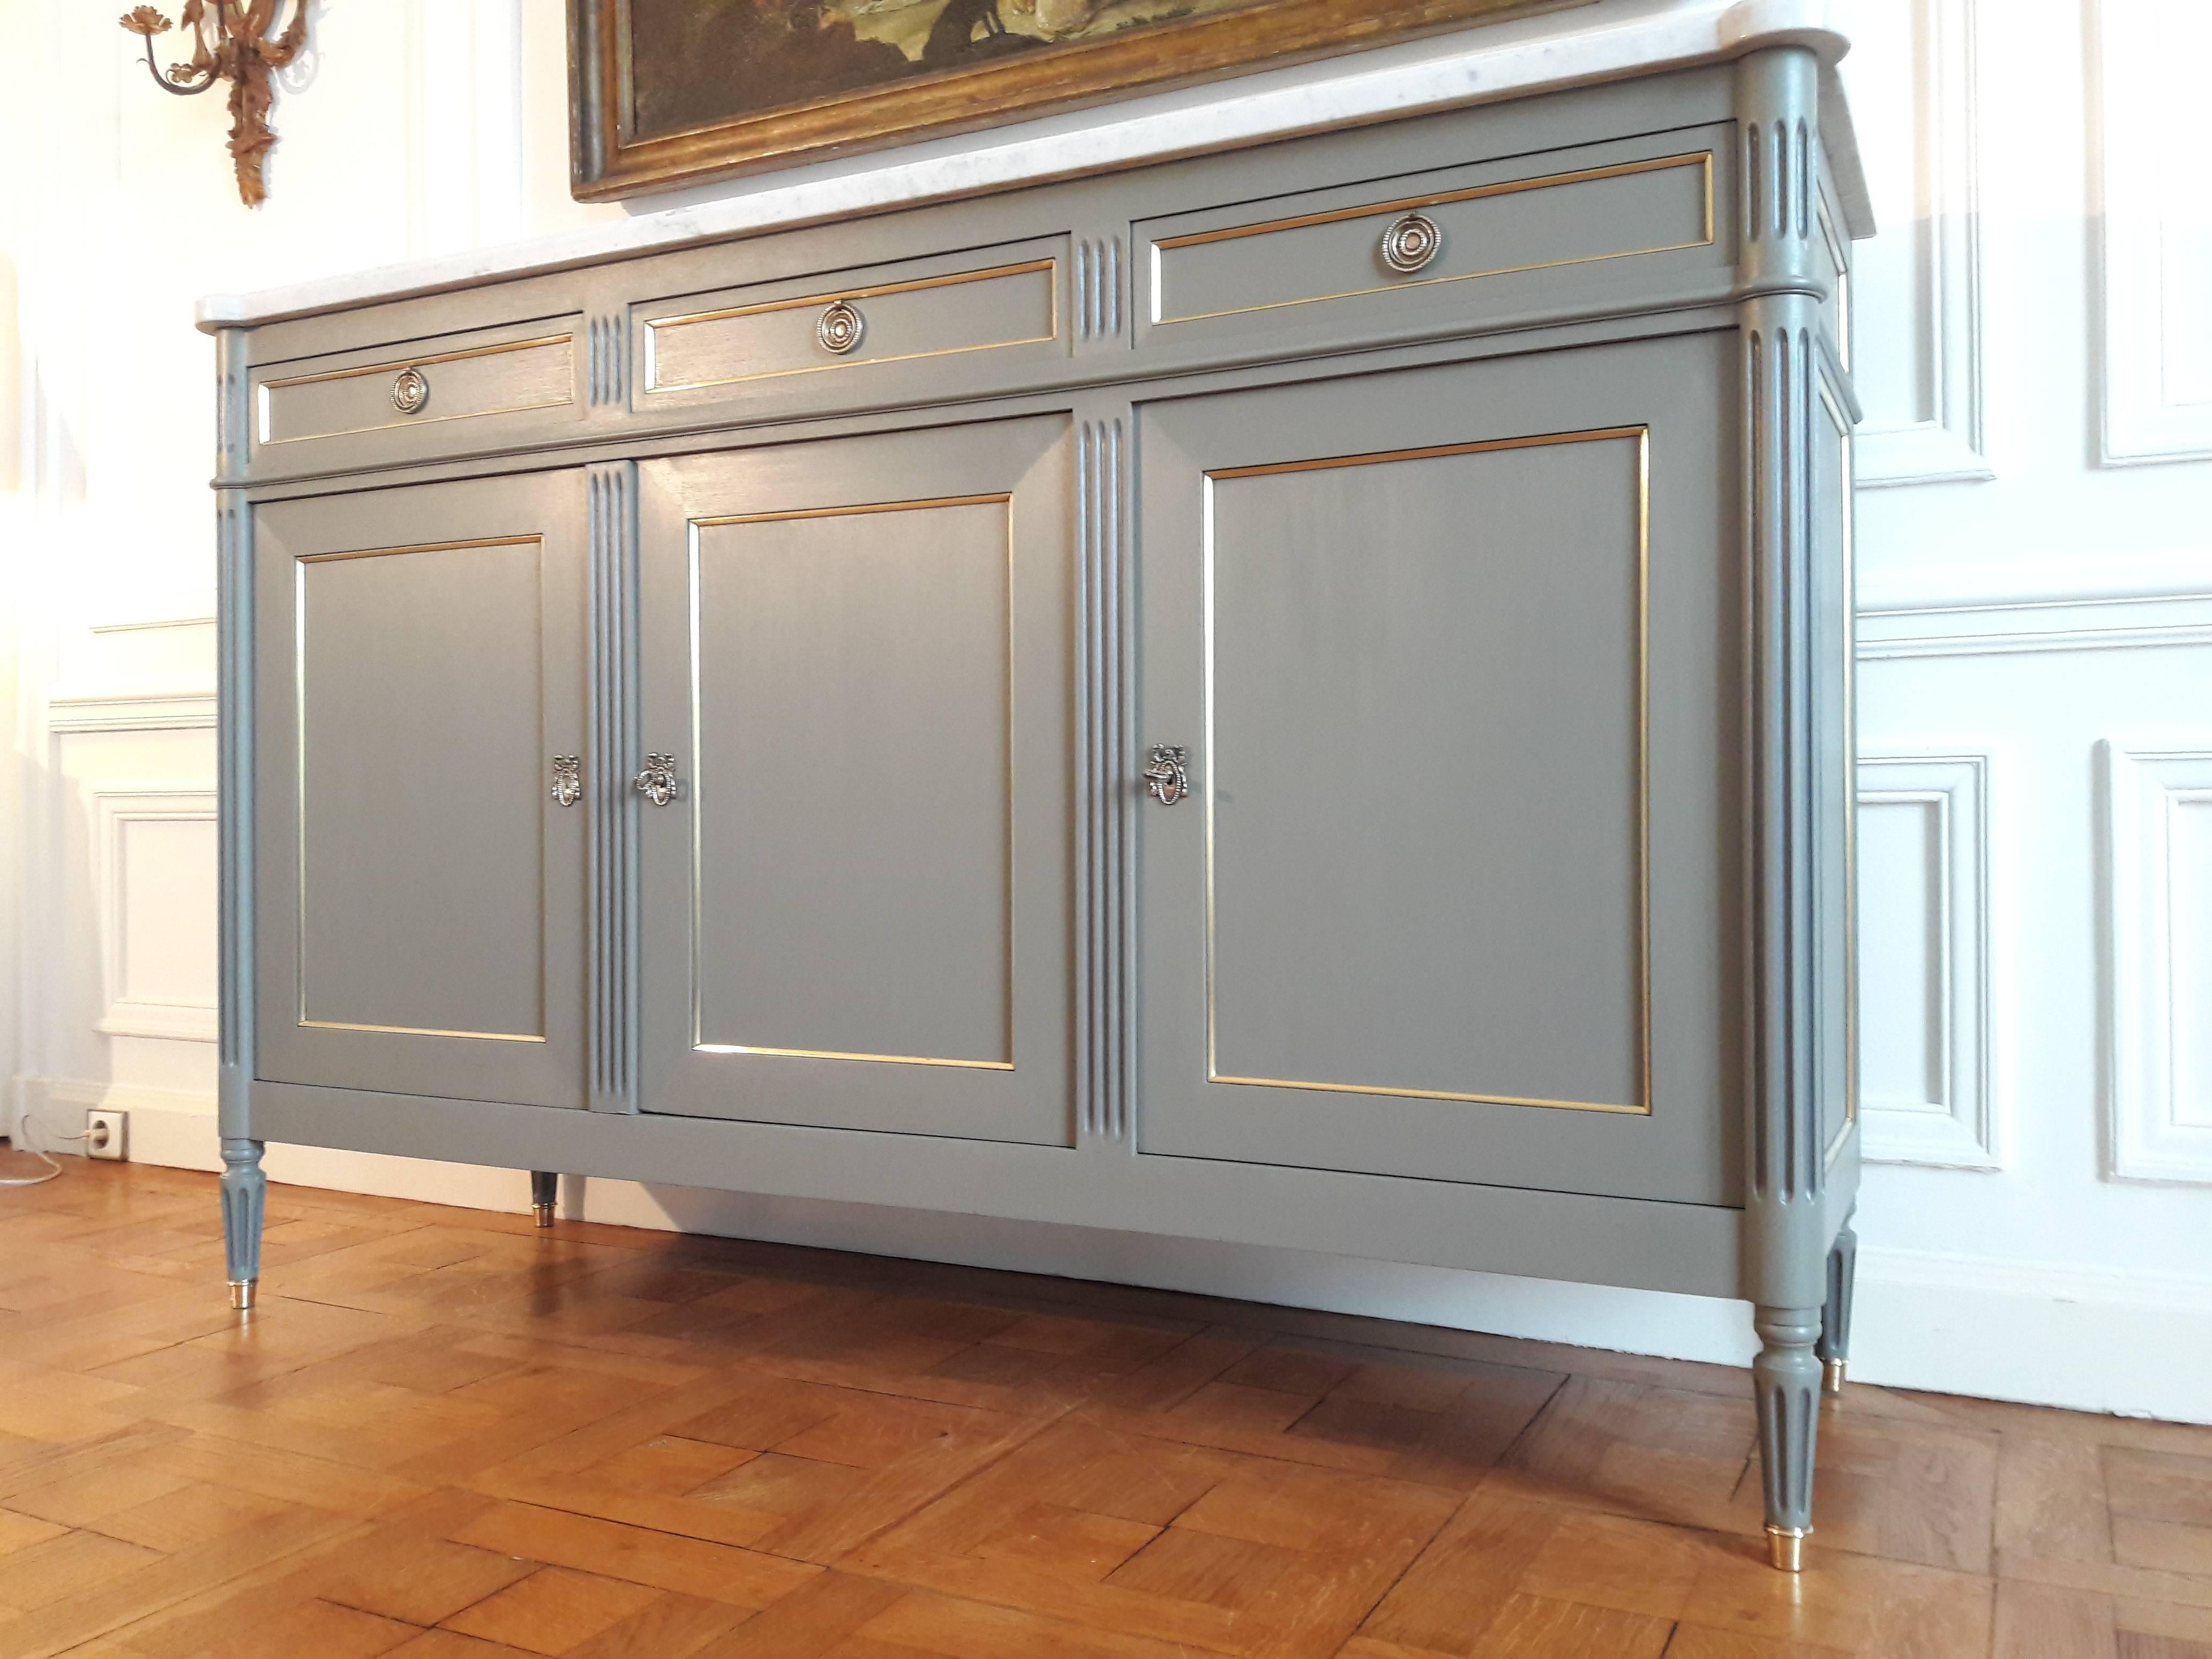 Antique French, Louis XVI style buffet topped with a superb white Carrara marble, fluted legs finished with golden bronze clogs.
Three dovetailed drawers and doors with brass details and keys.